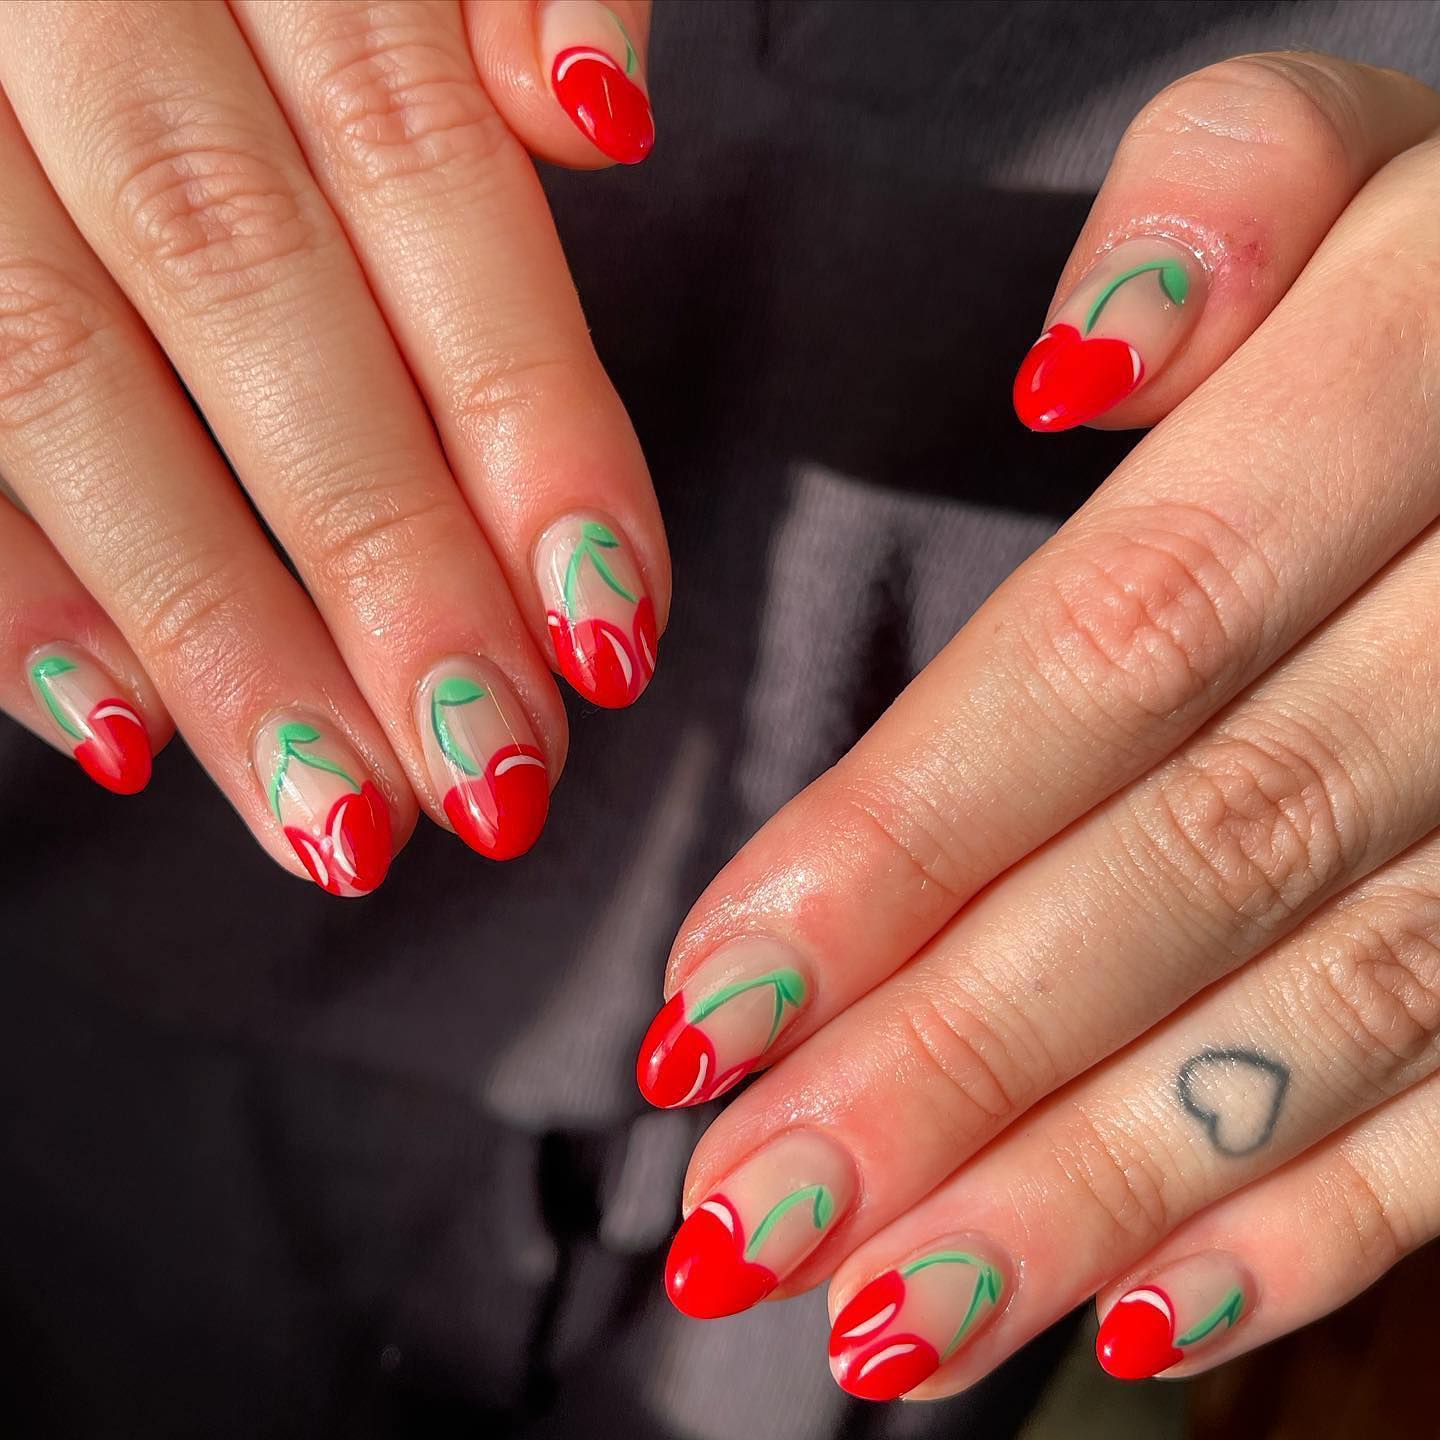 Cherry lovers! This nail art is so cute and it is a great idea for summer.